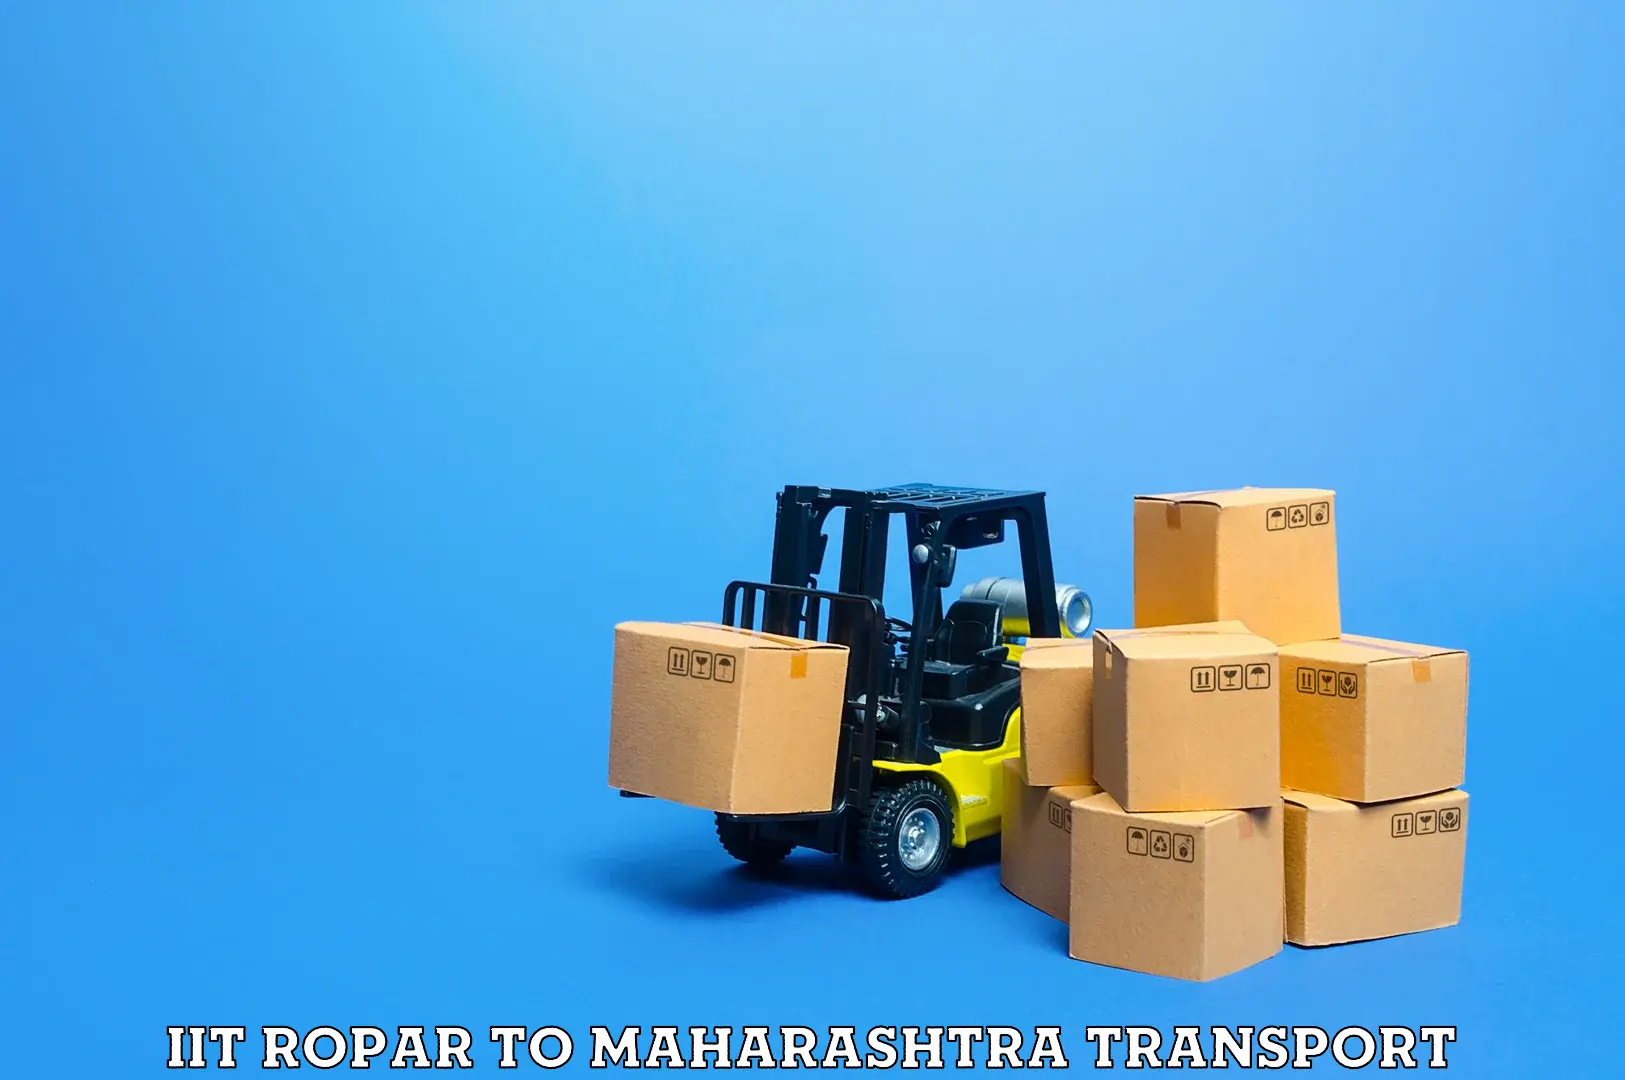 Transport bike from one state to another IIT Ropar to Mahabaleshwar